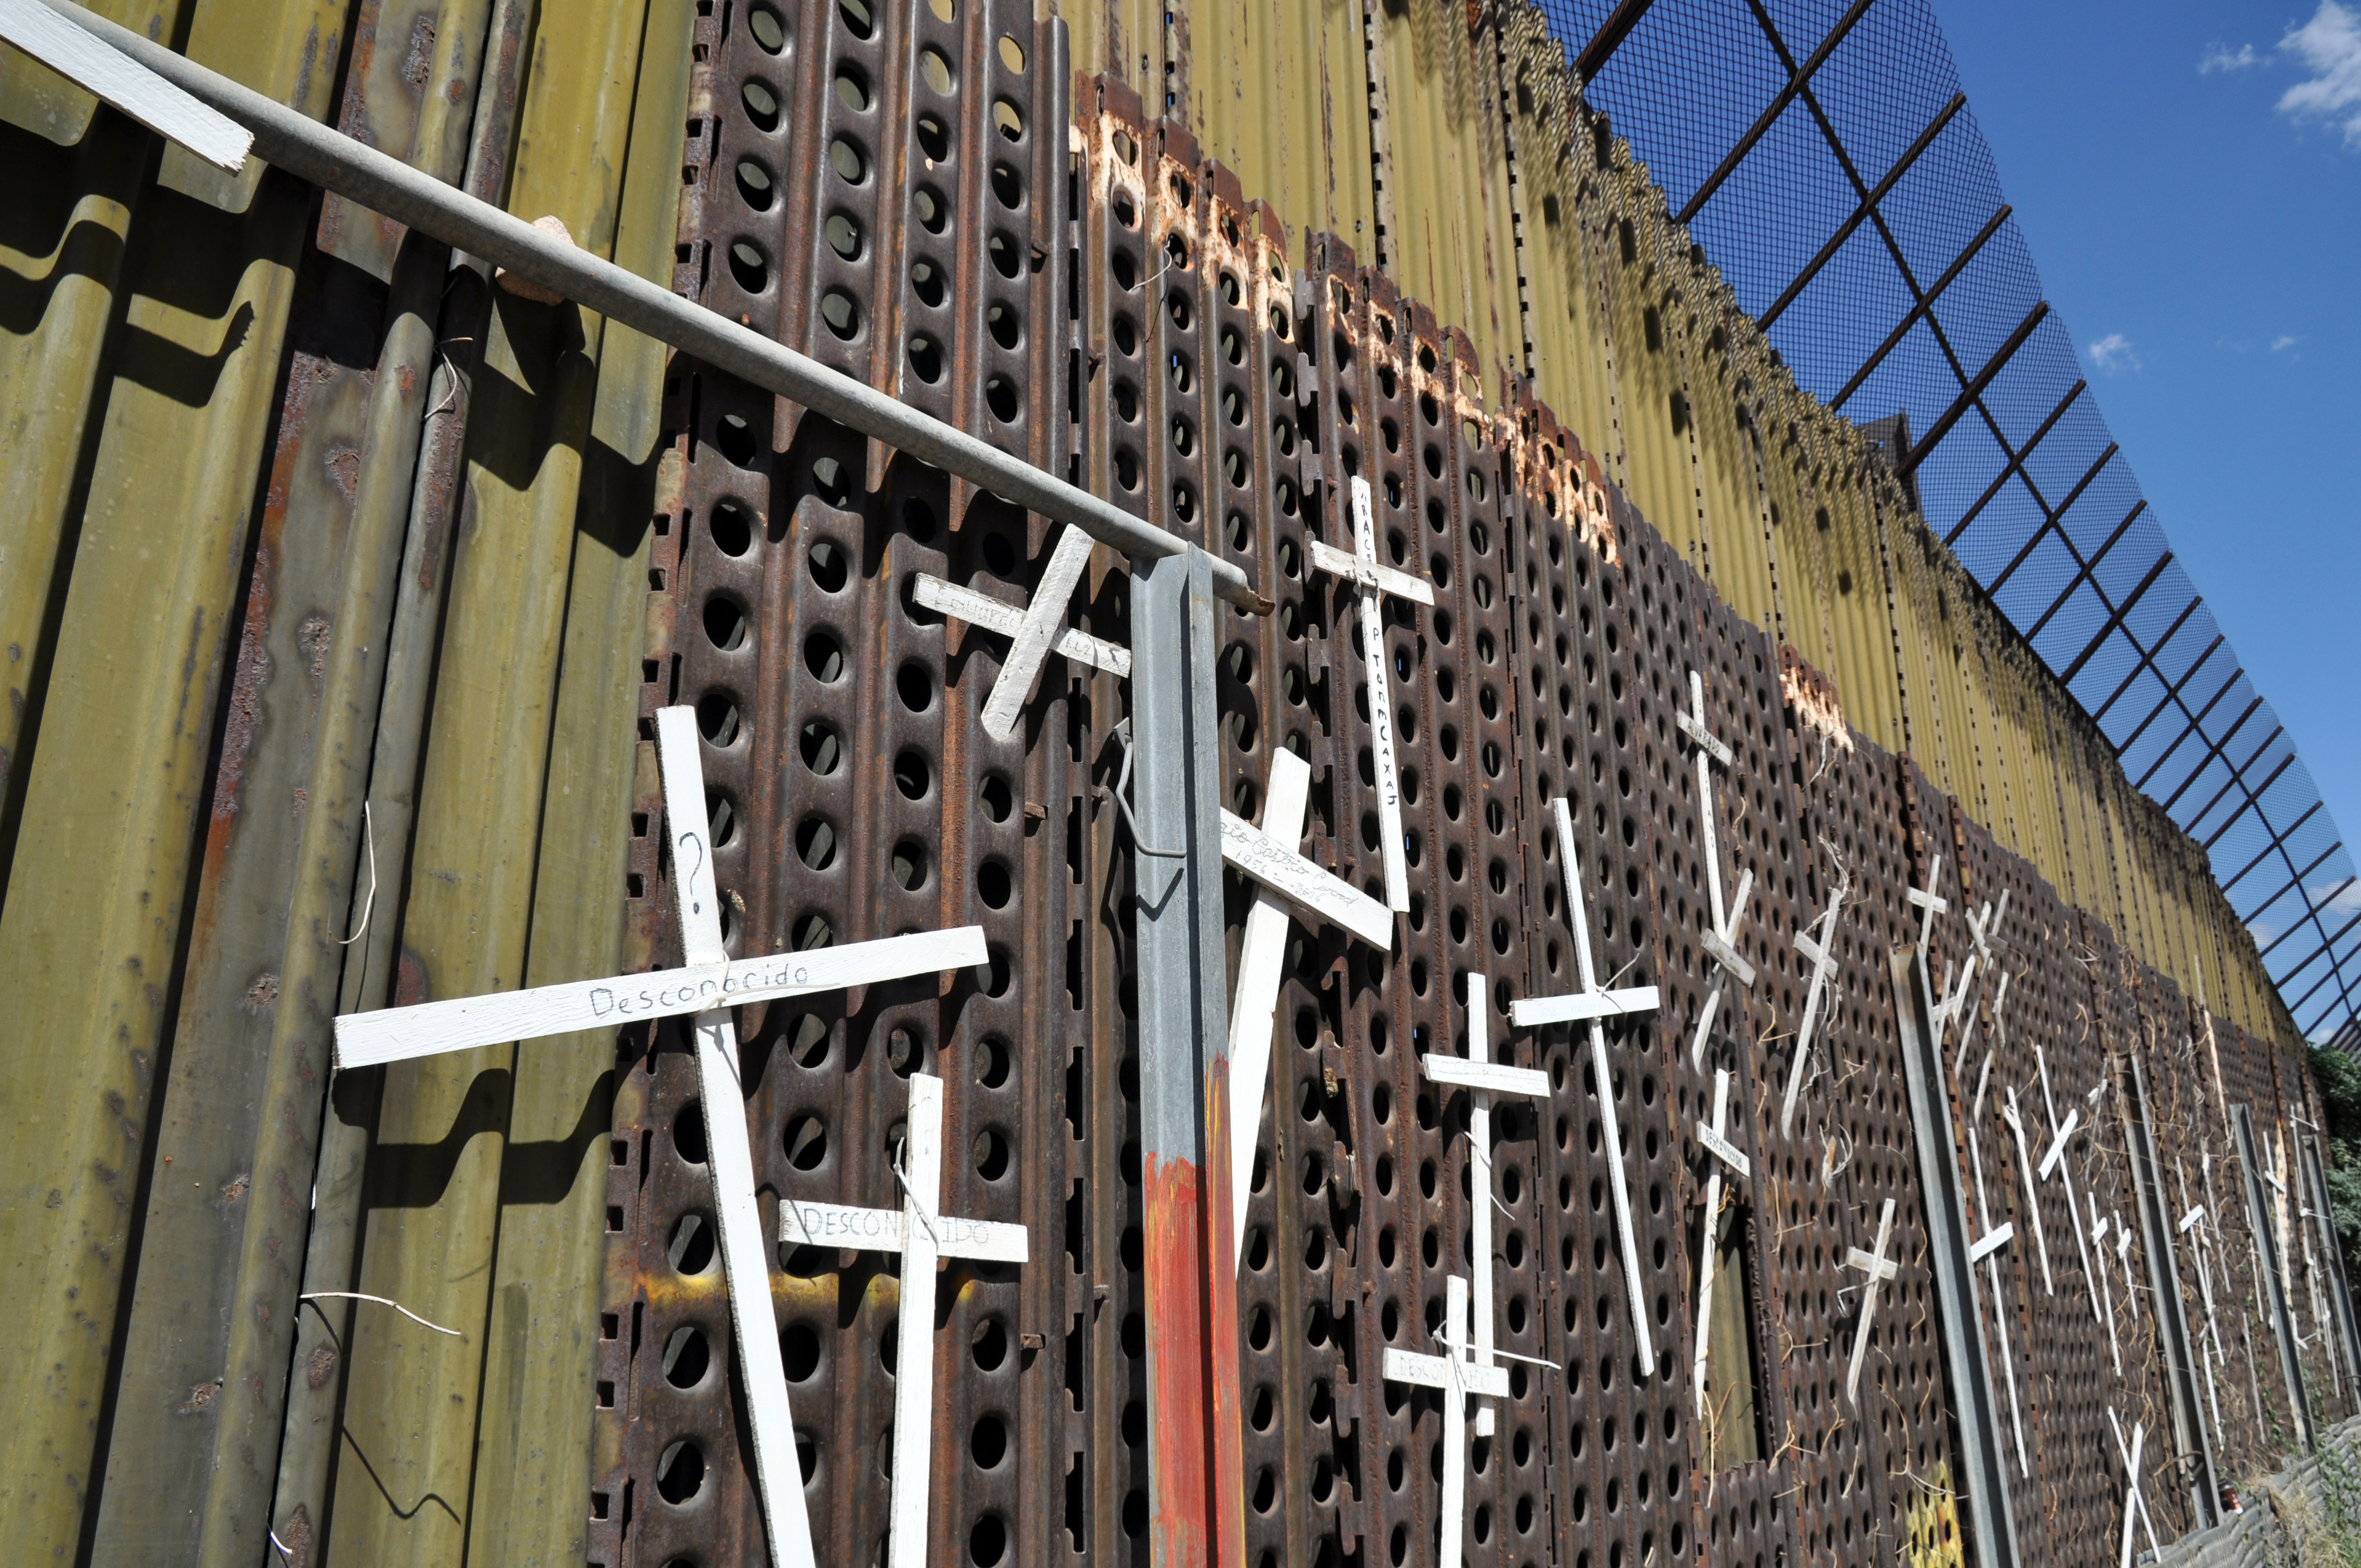 Wall of Crosses in Nogales, photo by jonathan mcintosh on Flickr